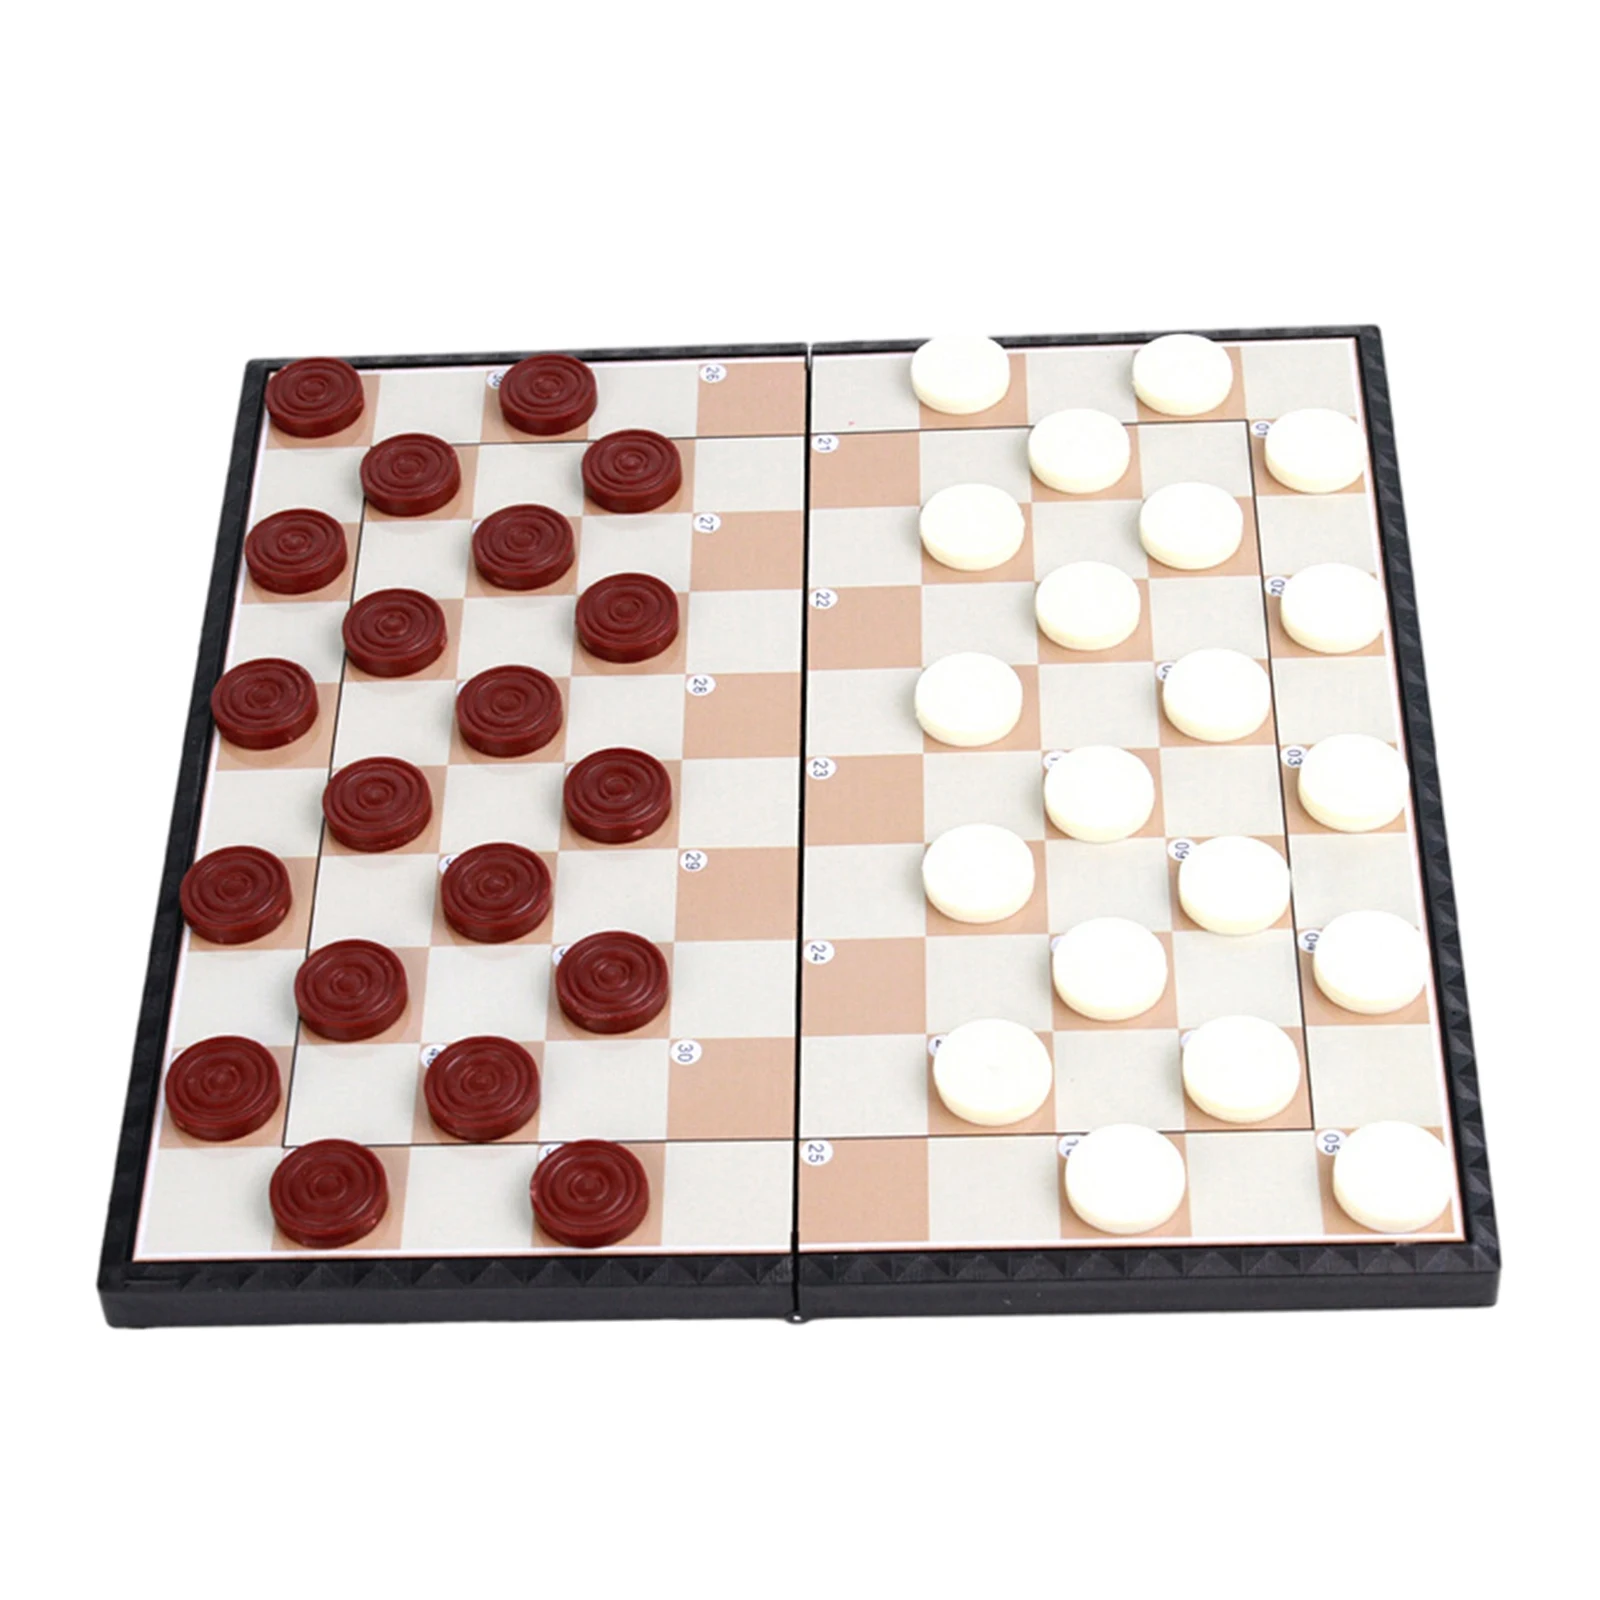 Checkers Board Game Set High-quality Magnetic Checkers Folding Checkerboard 27x27 CM Chessboard with Checkers Pieces